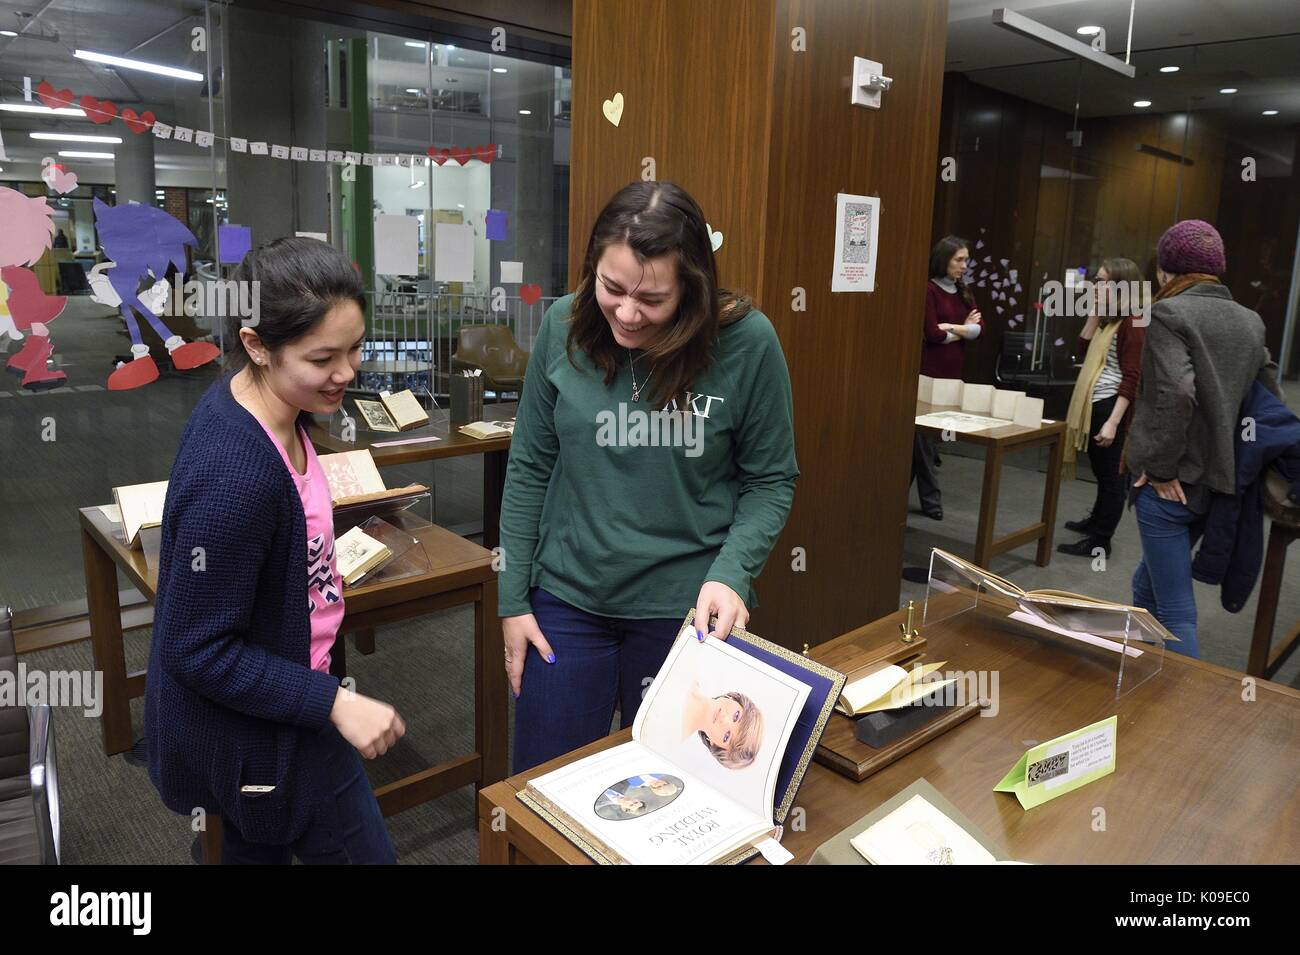 Two female college students laughing at a page in a book at the Dirty Books and Longing Looks event at the library, February 11, 2016. Stock Photo